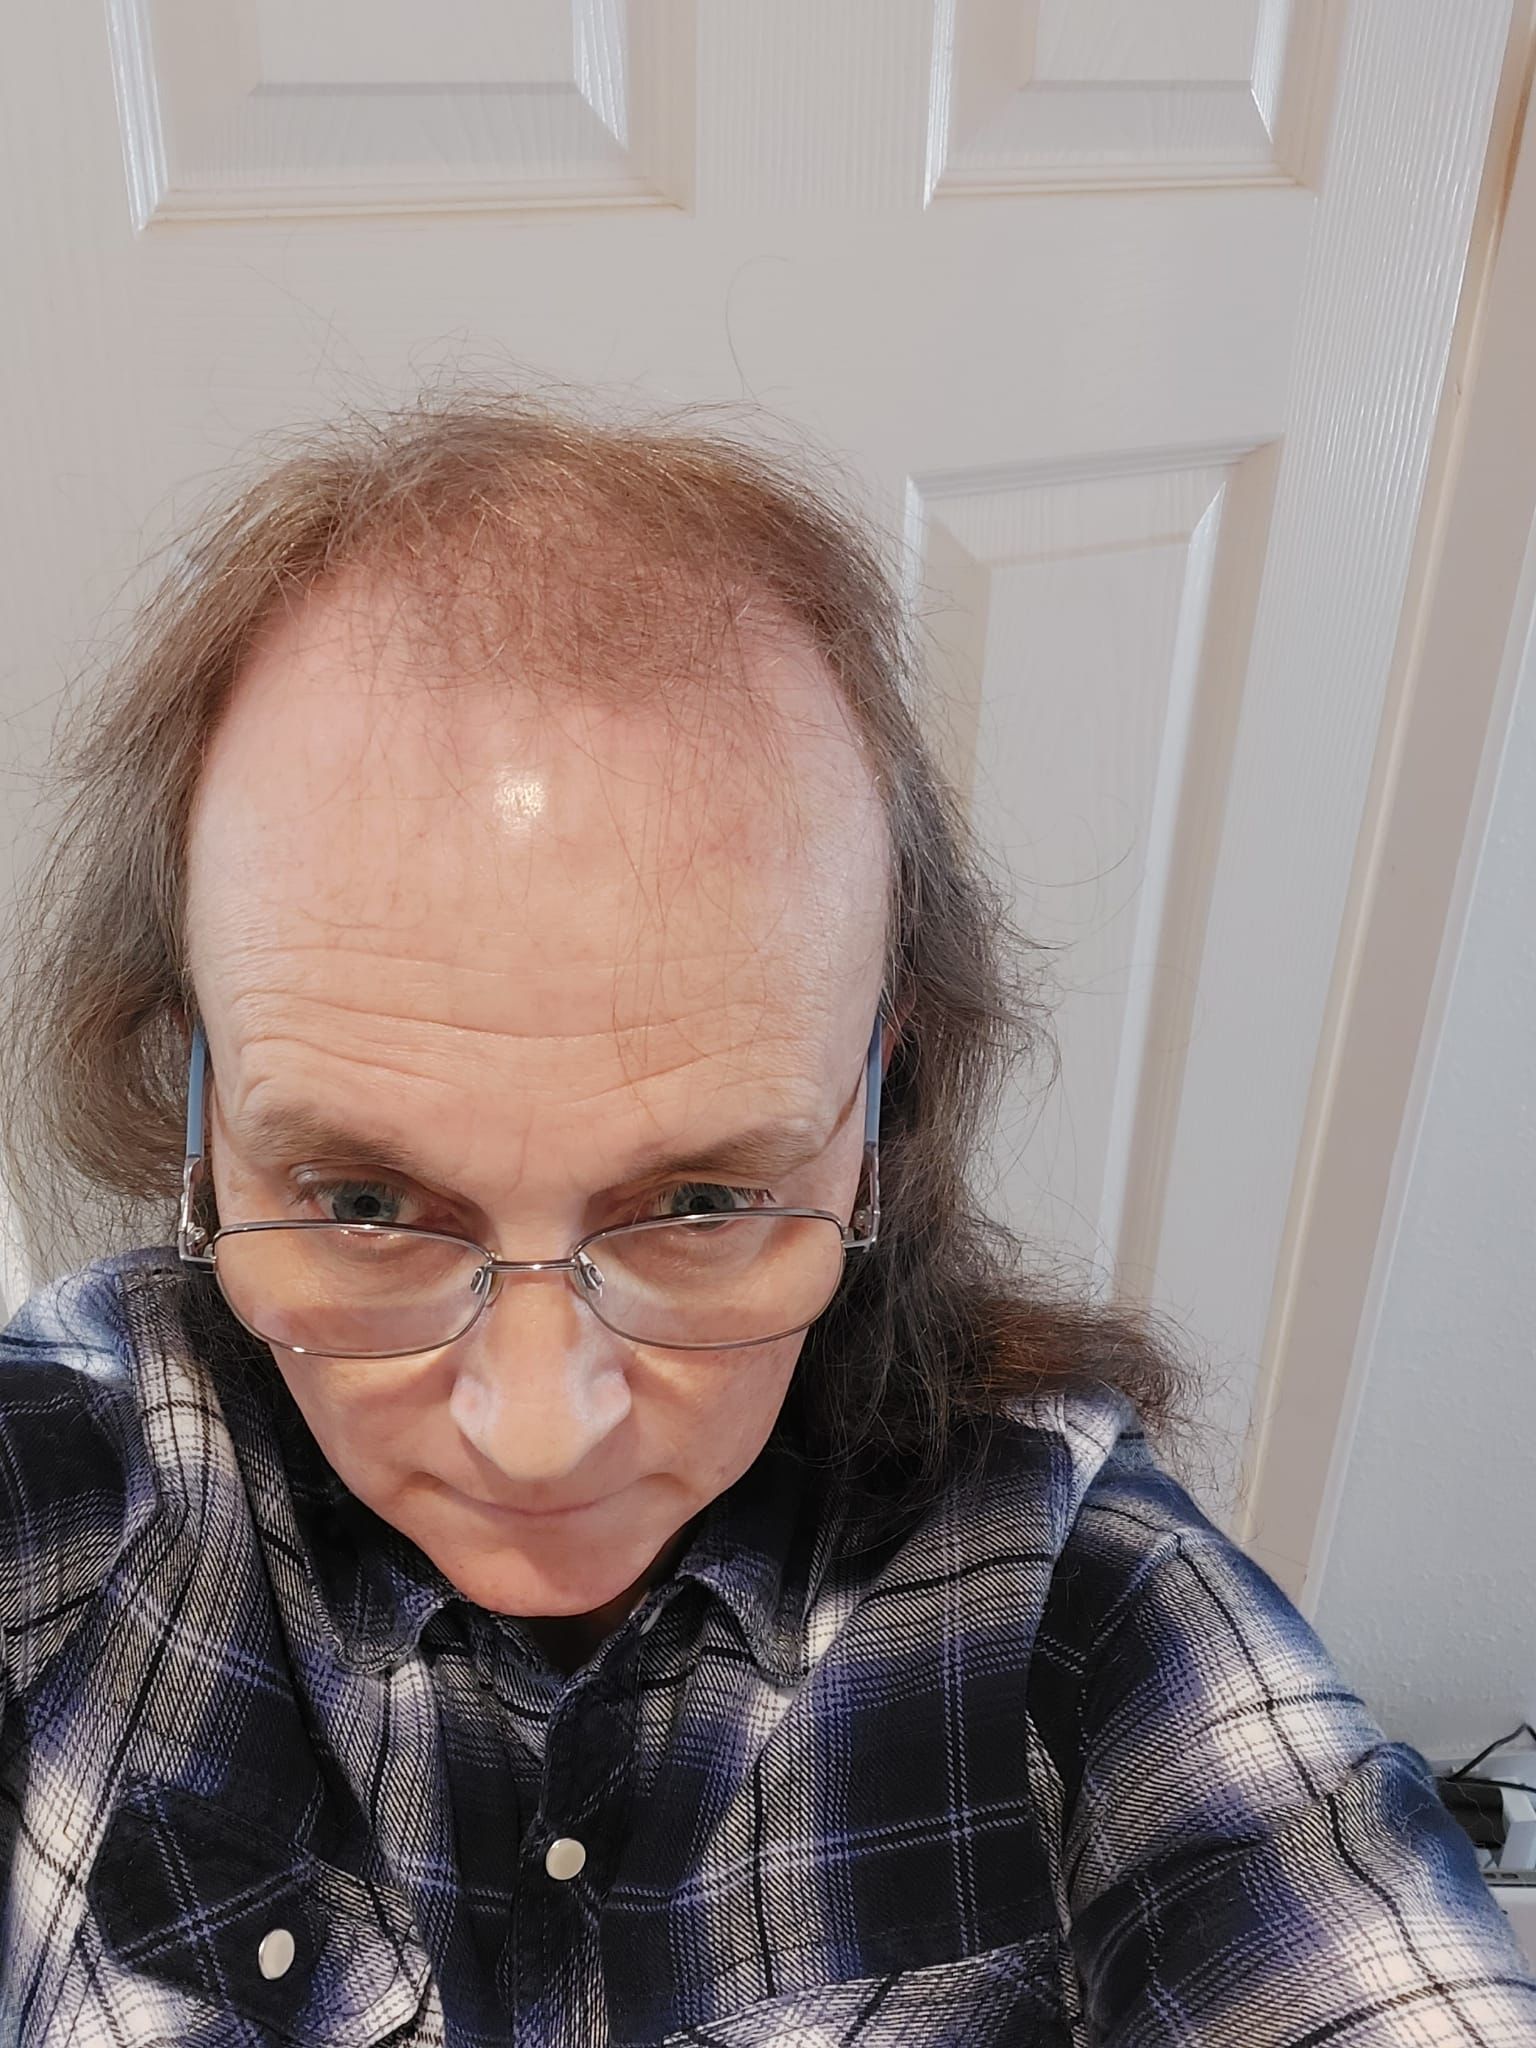 A transgender woman prior to a hair transplant